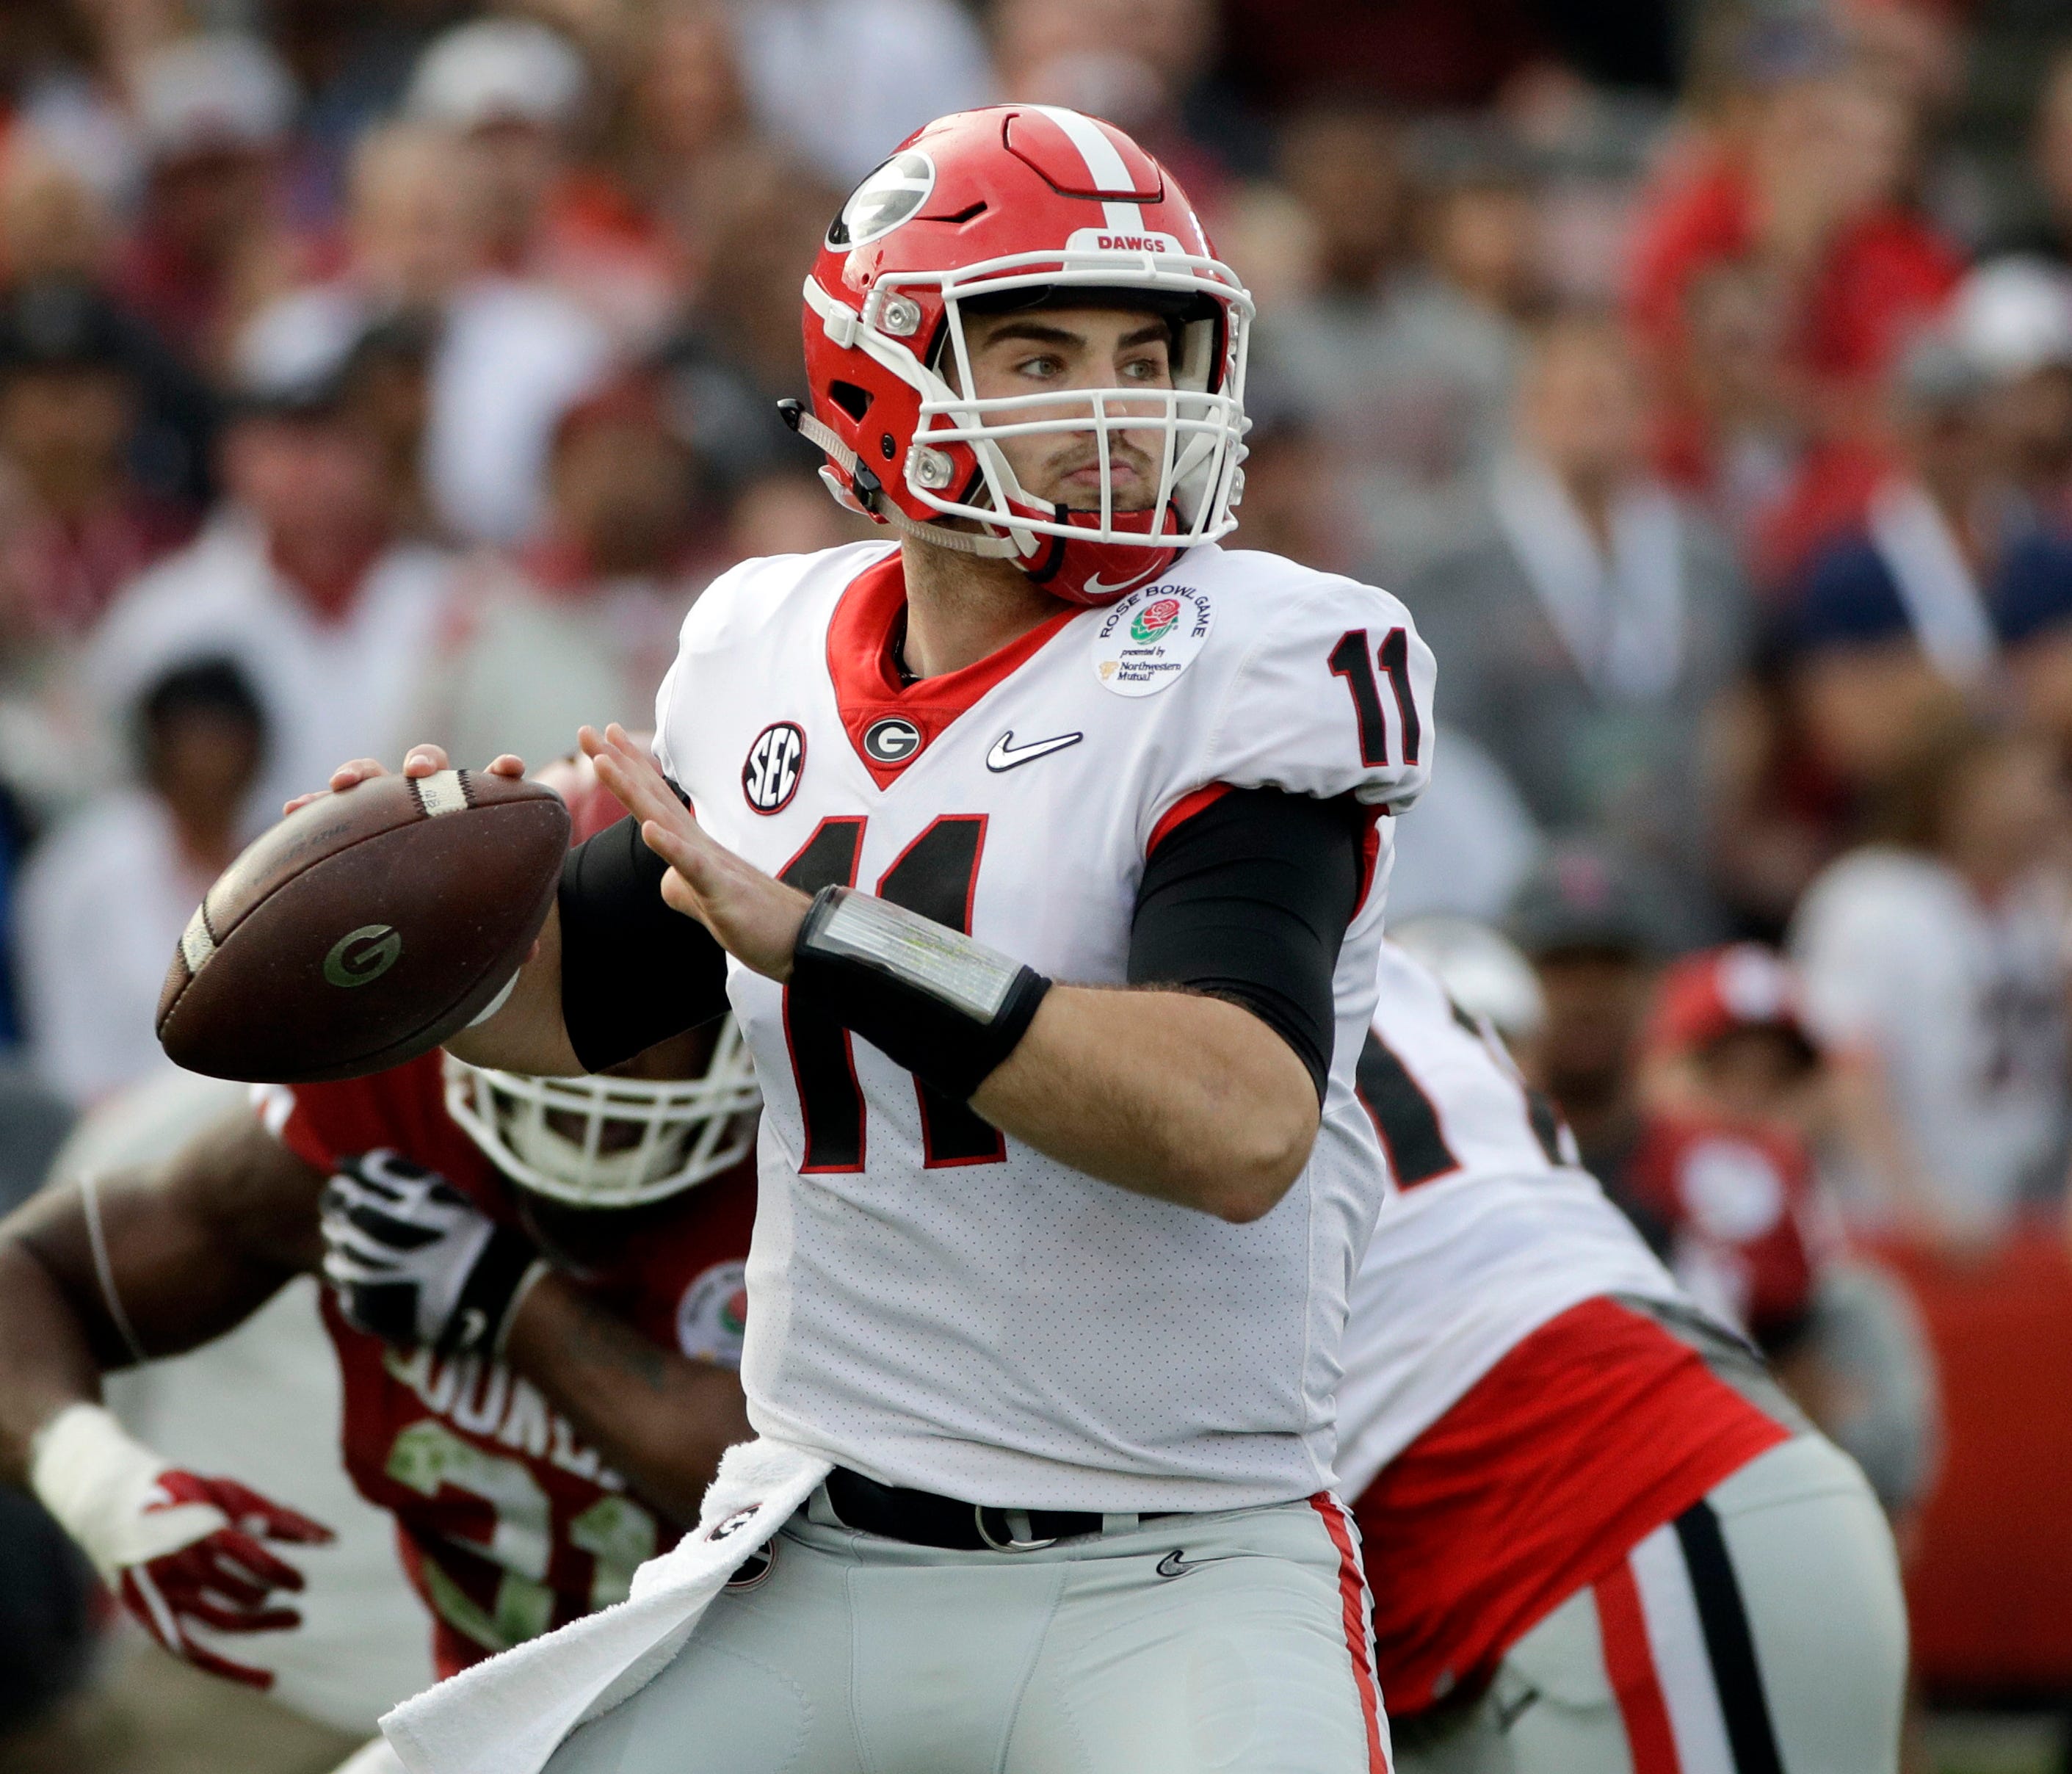 FILE- In this Monday, Jan. 1, 2018, file photo, Georgia quarterback Jake Fromm throws a pass during the Rose Bowl NCAA college football game against Oklahoma in Pasadena, Calif. Georgia plays Alabama in the Monday, Jan. 8, 2018, College Football nati